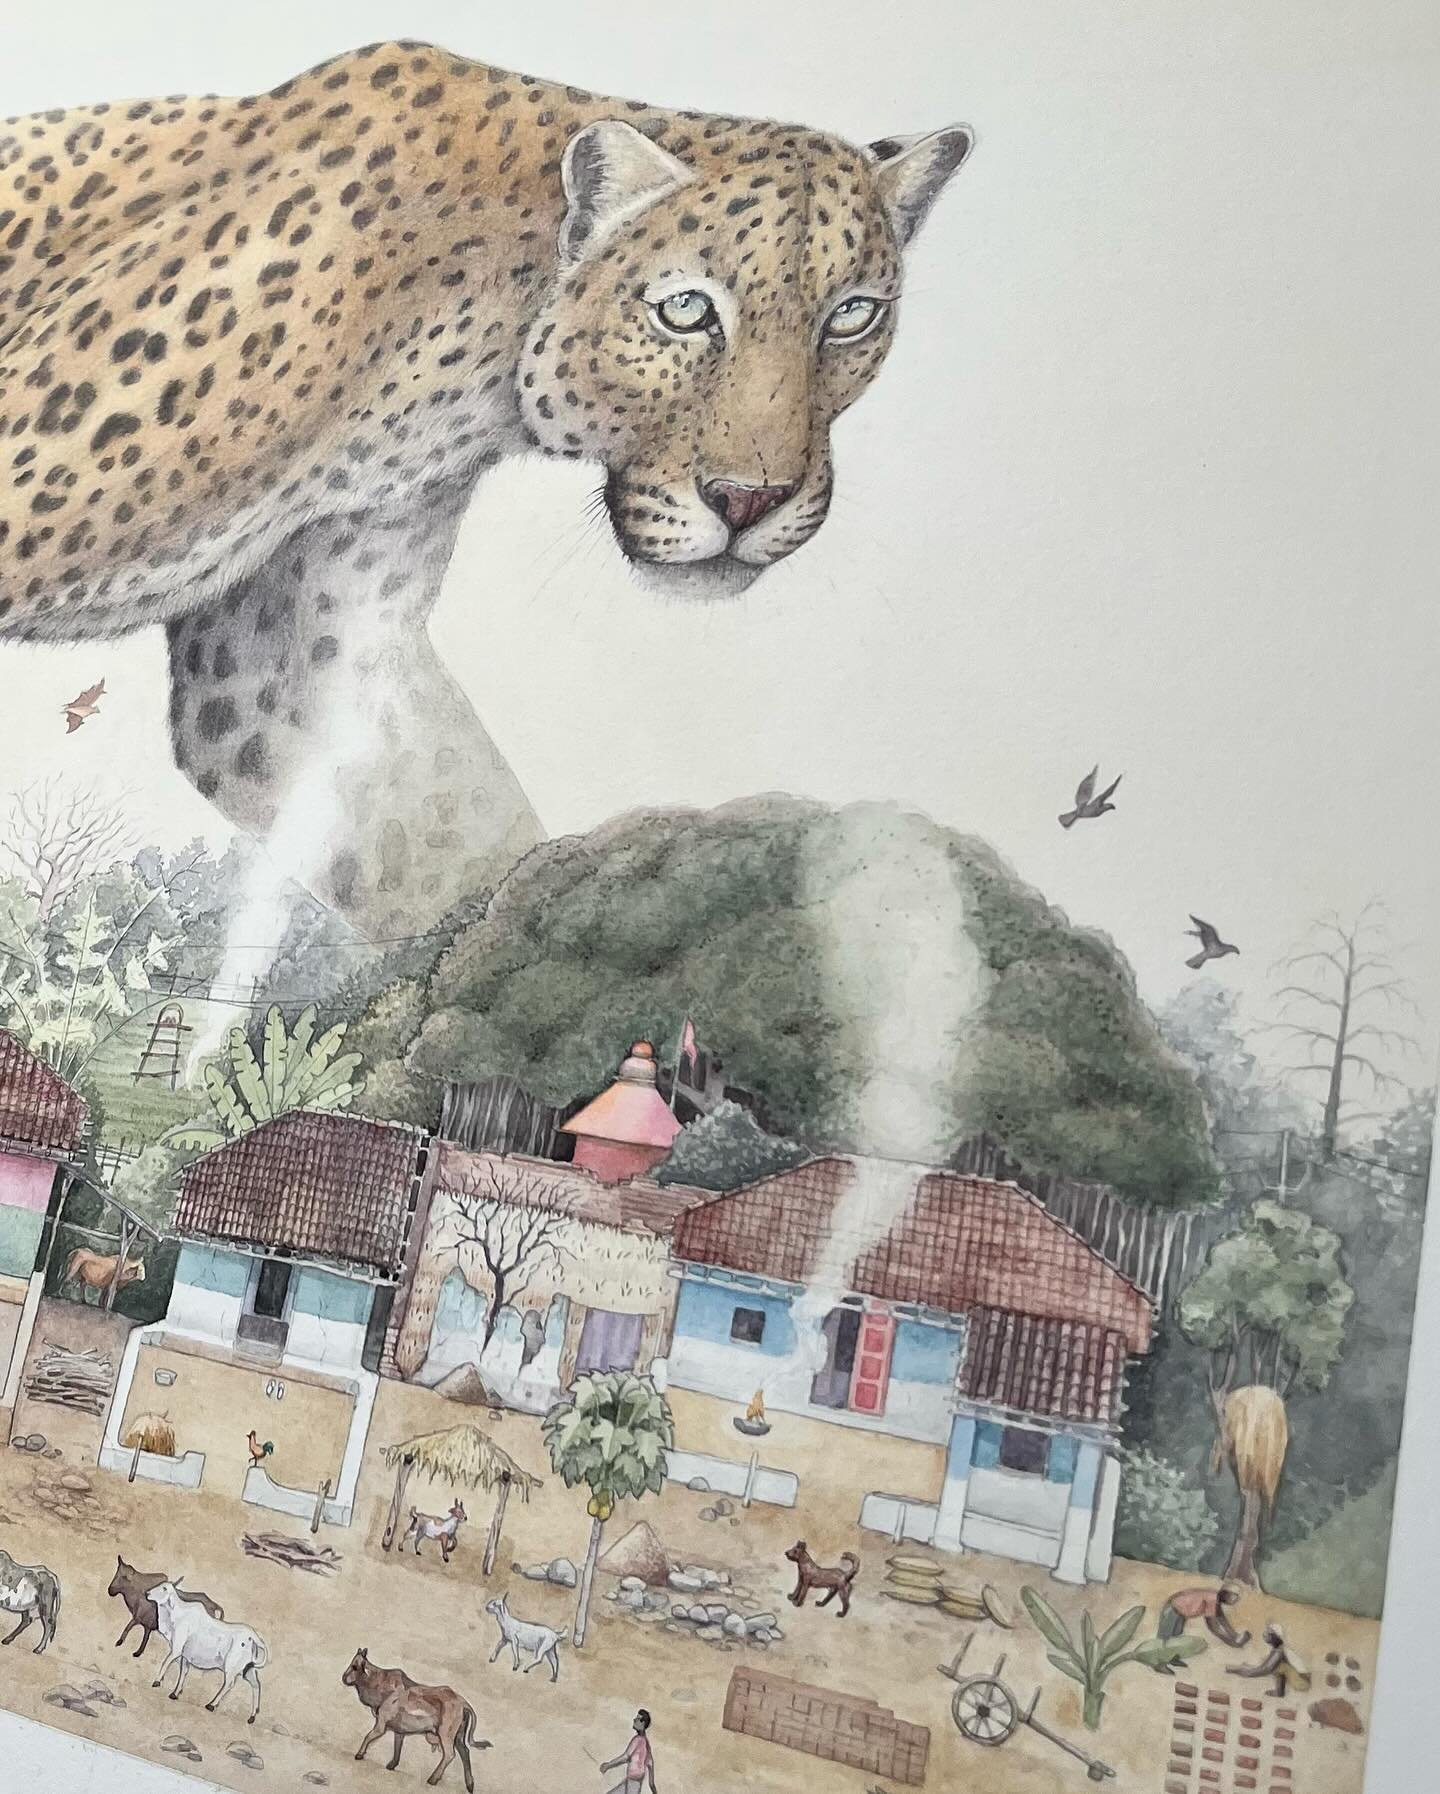 &lsquo;Till The Cows Come Home&rsquo; watercolour on cotton paper. While on our travels in Central India I was eager to see predators in the wild. As we&rsquo;d pass villages I&rsquo;d see how people adapt to life around National Parks. Being confron